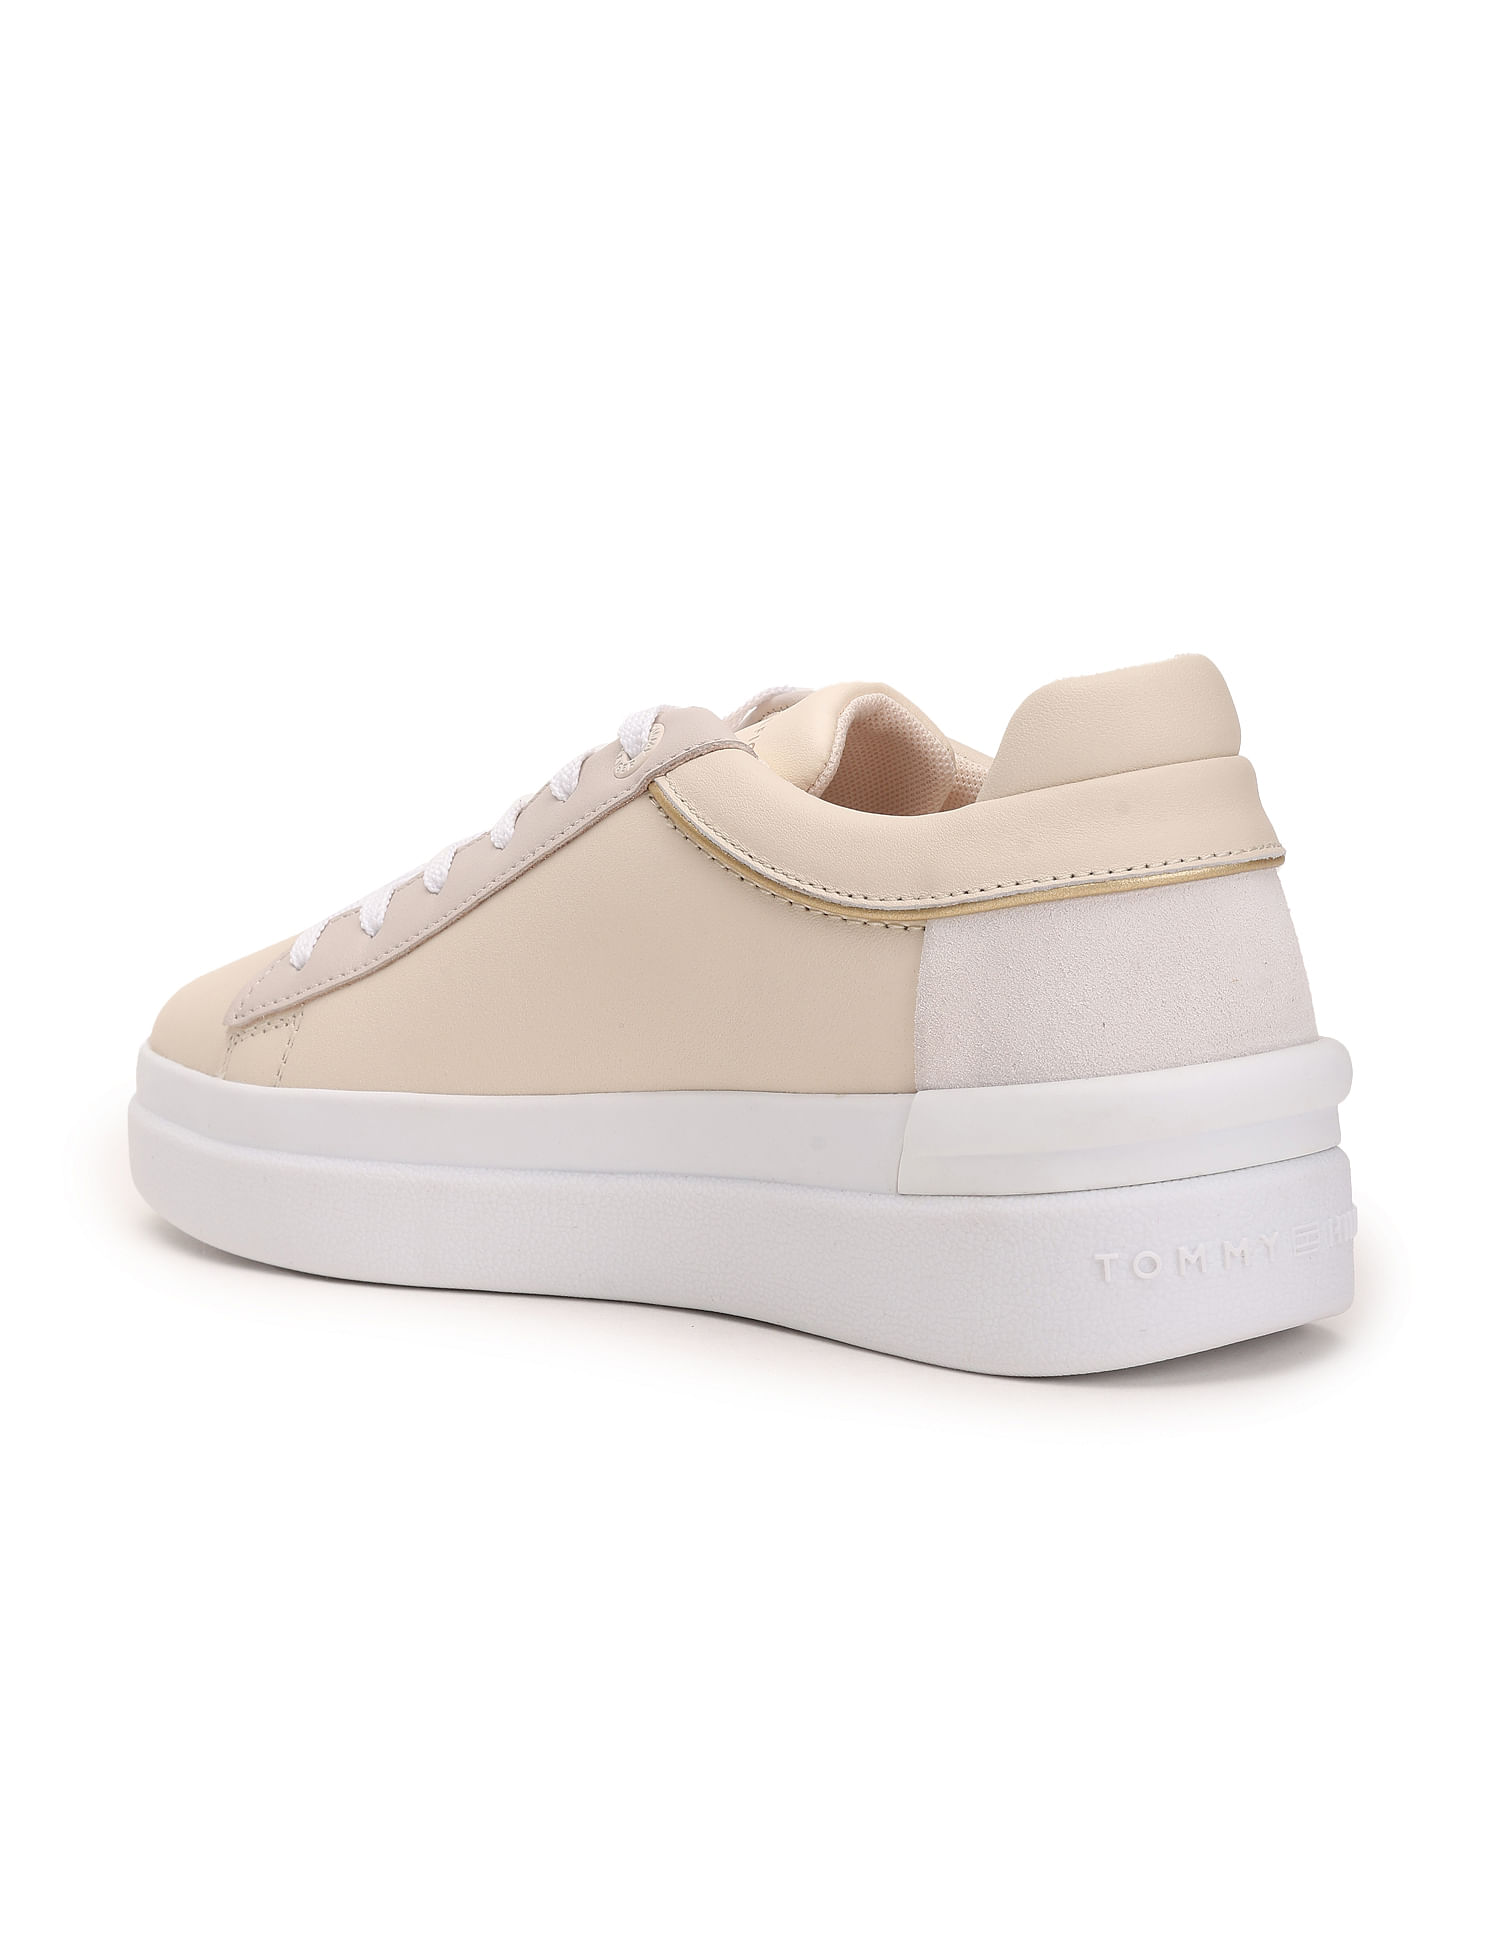 Buy Tommy Hilfiger Women Graphic Court Sneakers - NNNOW.com